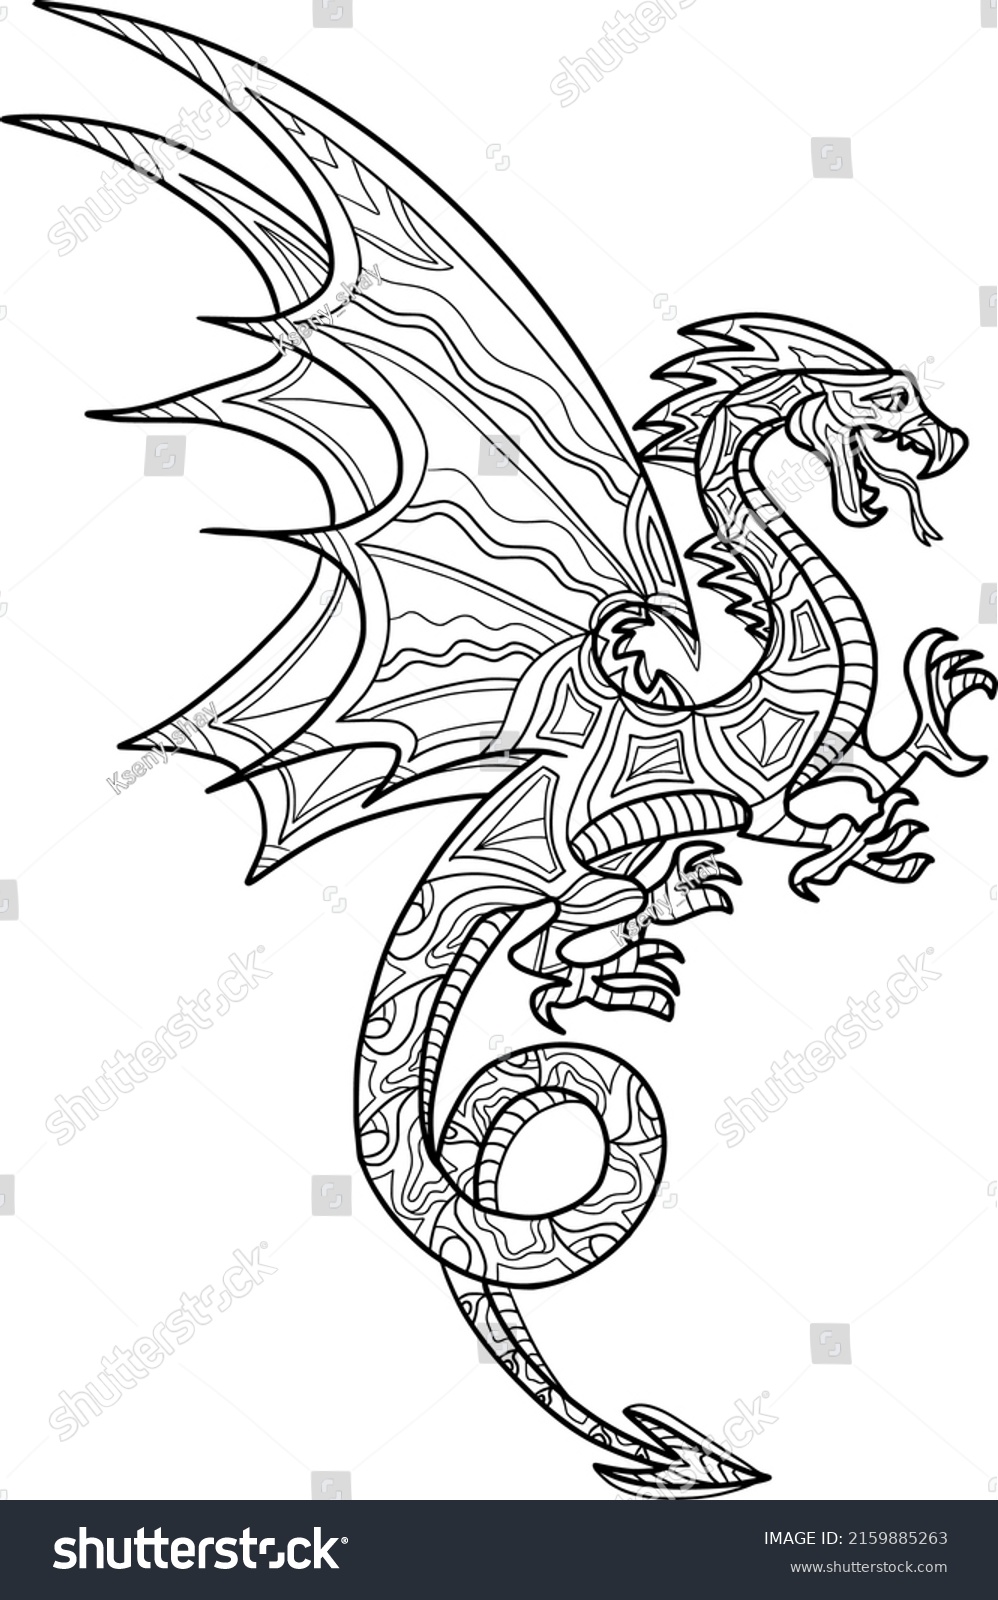 Line Drawing Dragon Antistress Relax Adults Stock Vector (Royalty Free ...